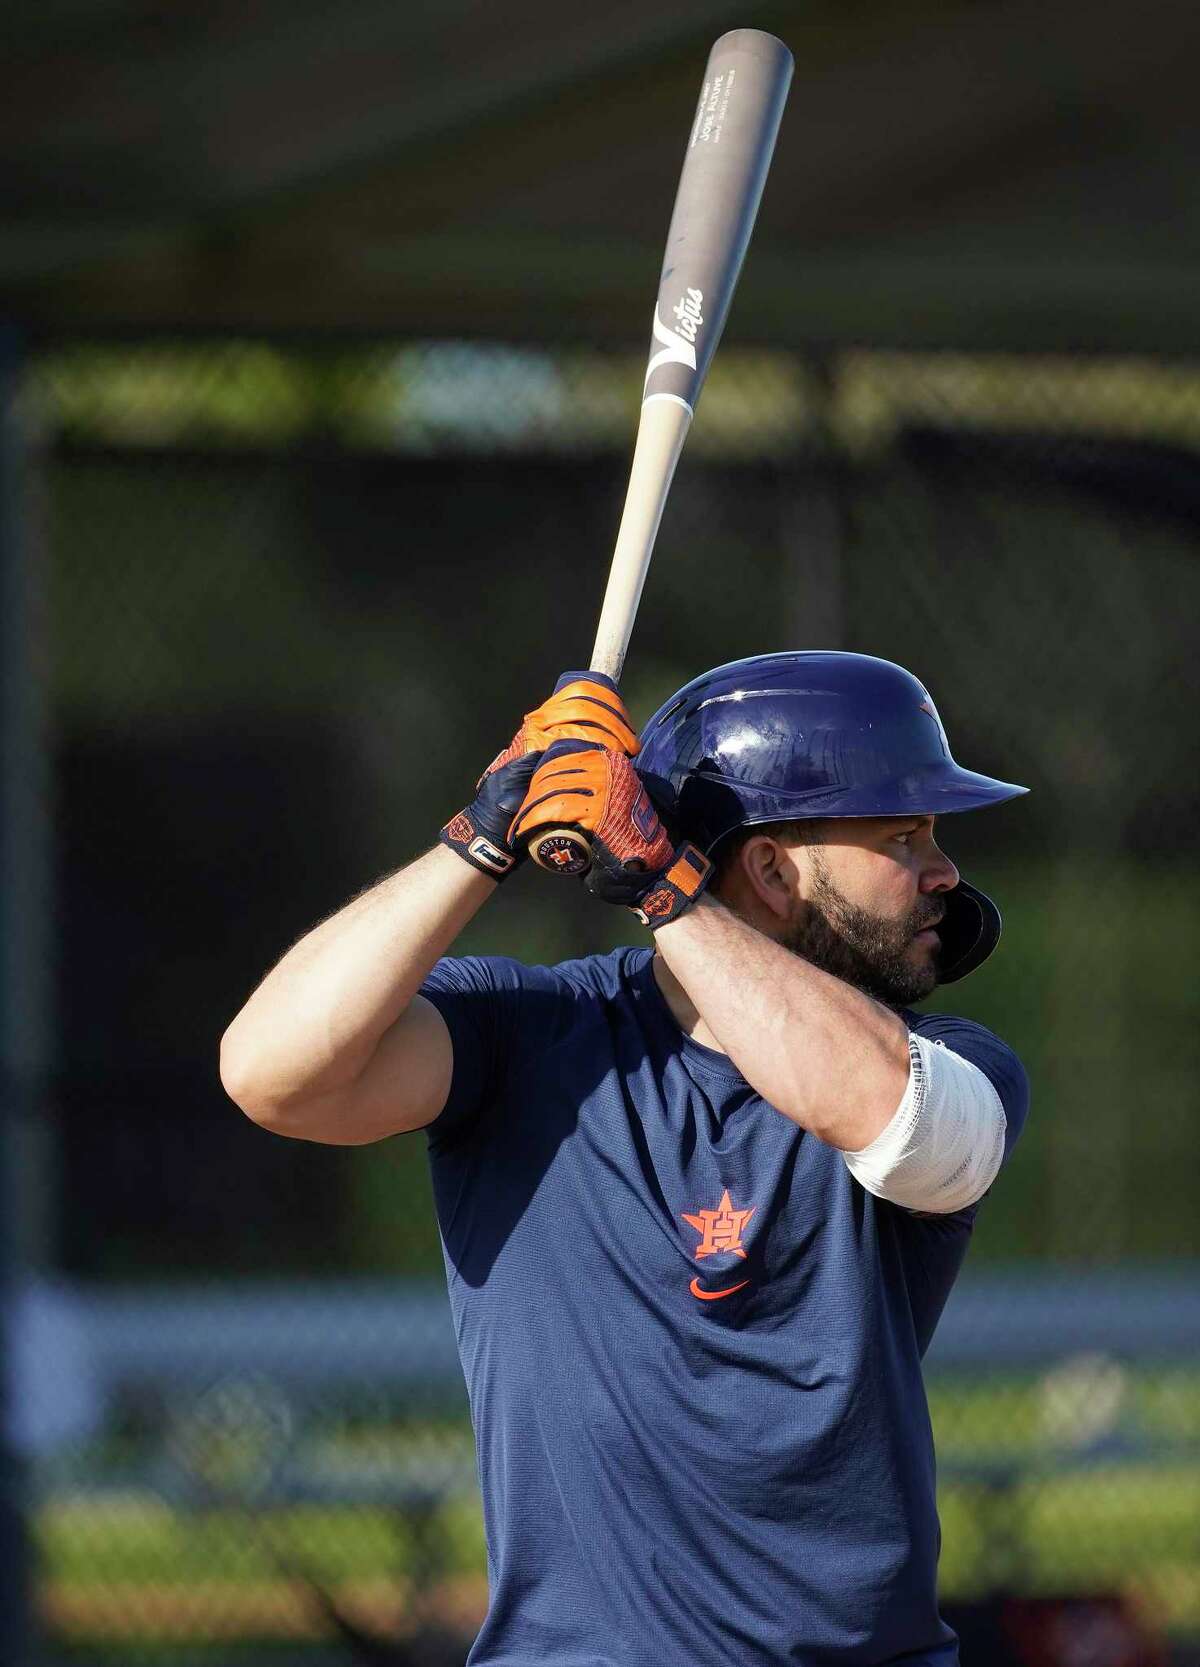 Houston Astros second baseman Jose Altuve (27) hits live batting practice during work outs at the Astros spring training camp at The Ballpark of the Palm Beaches on Friday, March 18, 2022 in West Palm Beach .